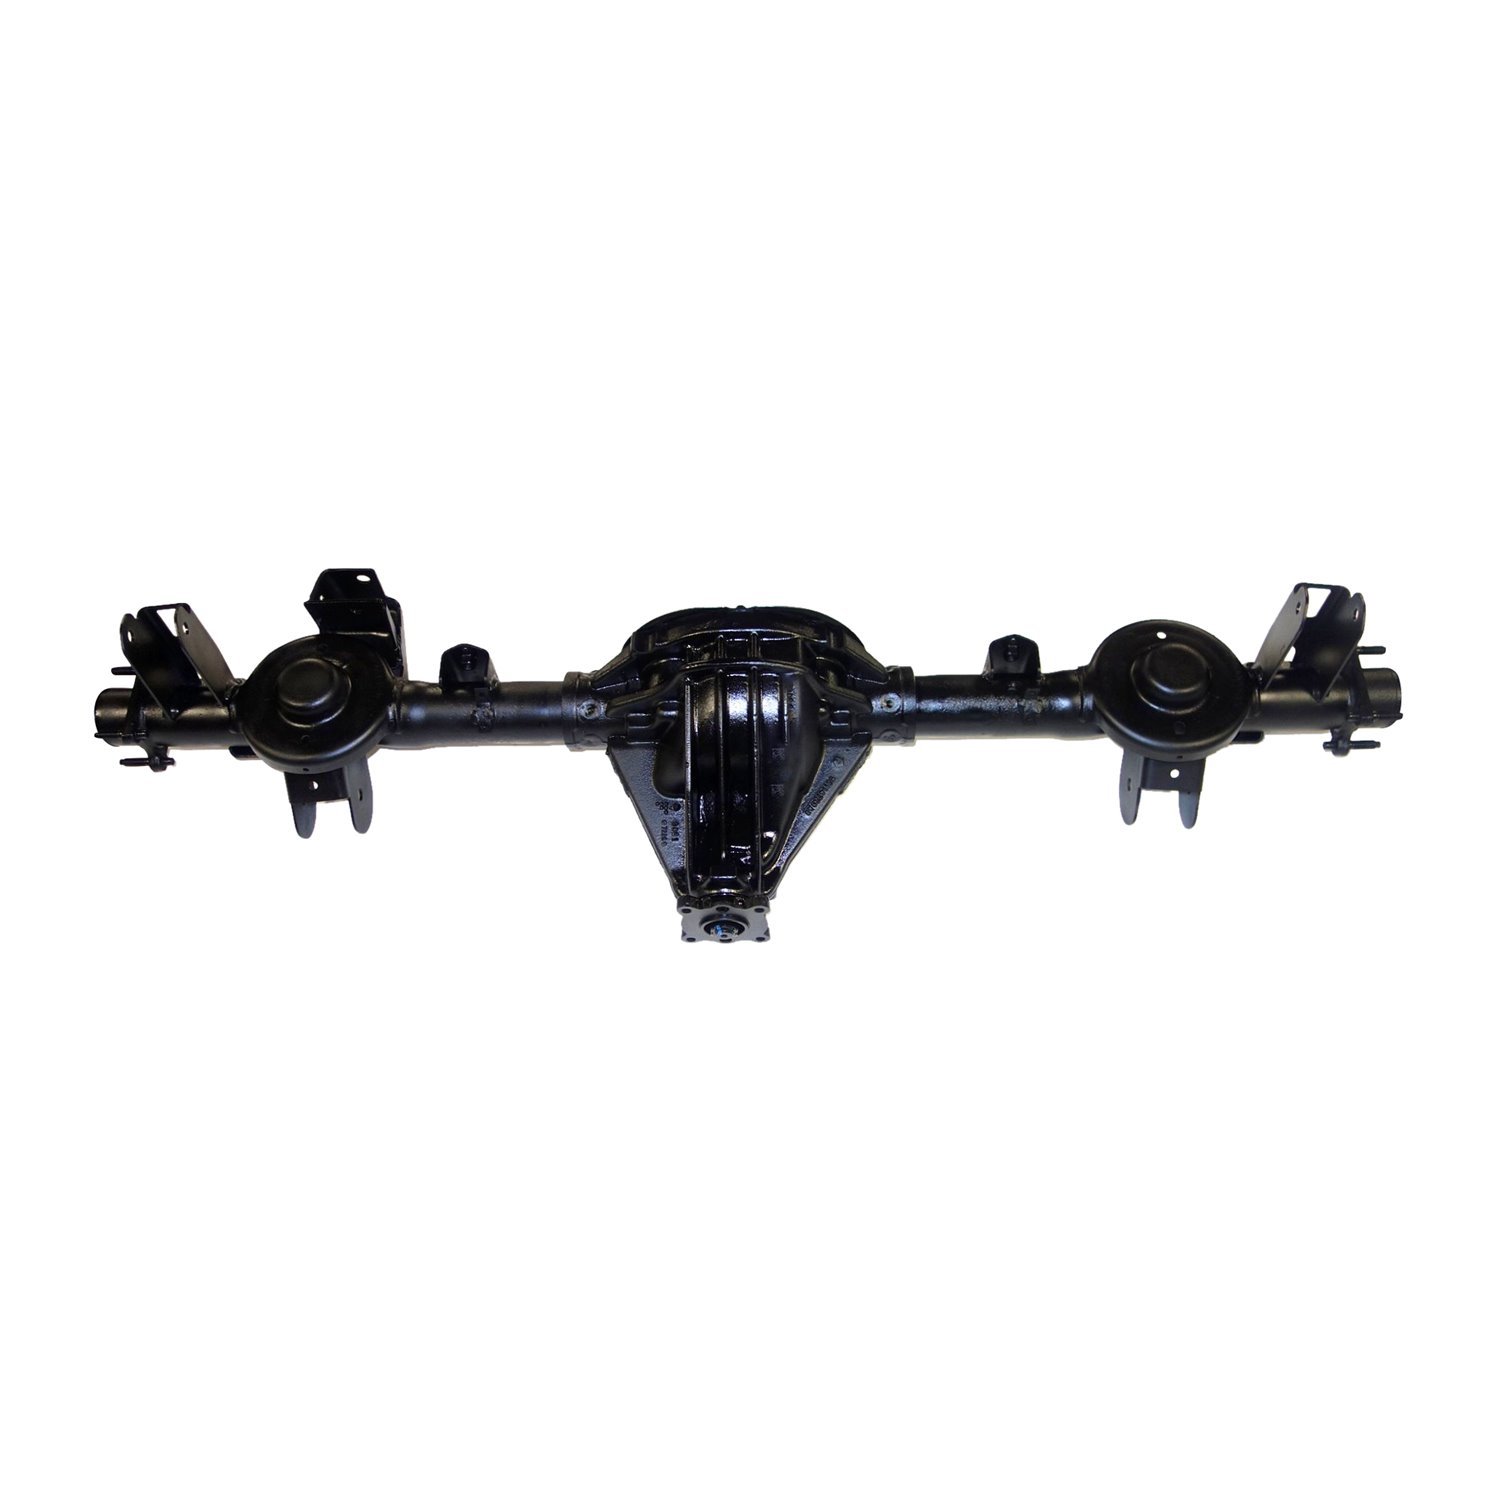 Remanufactured Complete Axle Assembly for Chy 8.25" 2005 Liberty 3.55 , 2.8l with ABS